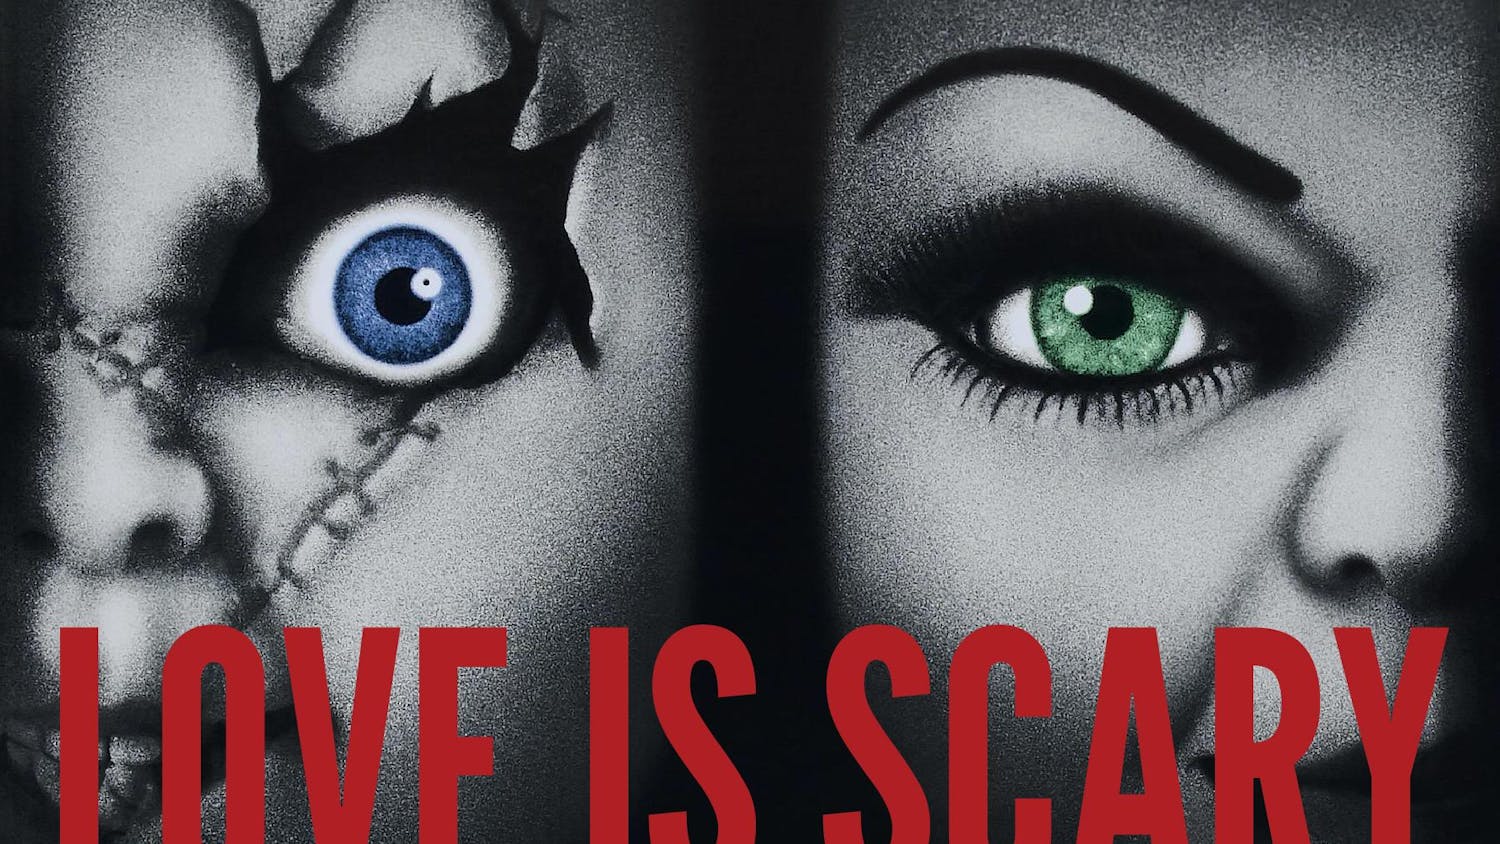 Love Is Scary